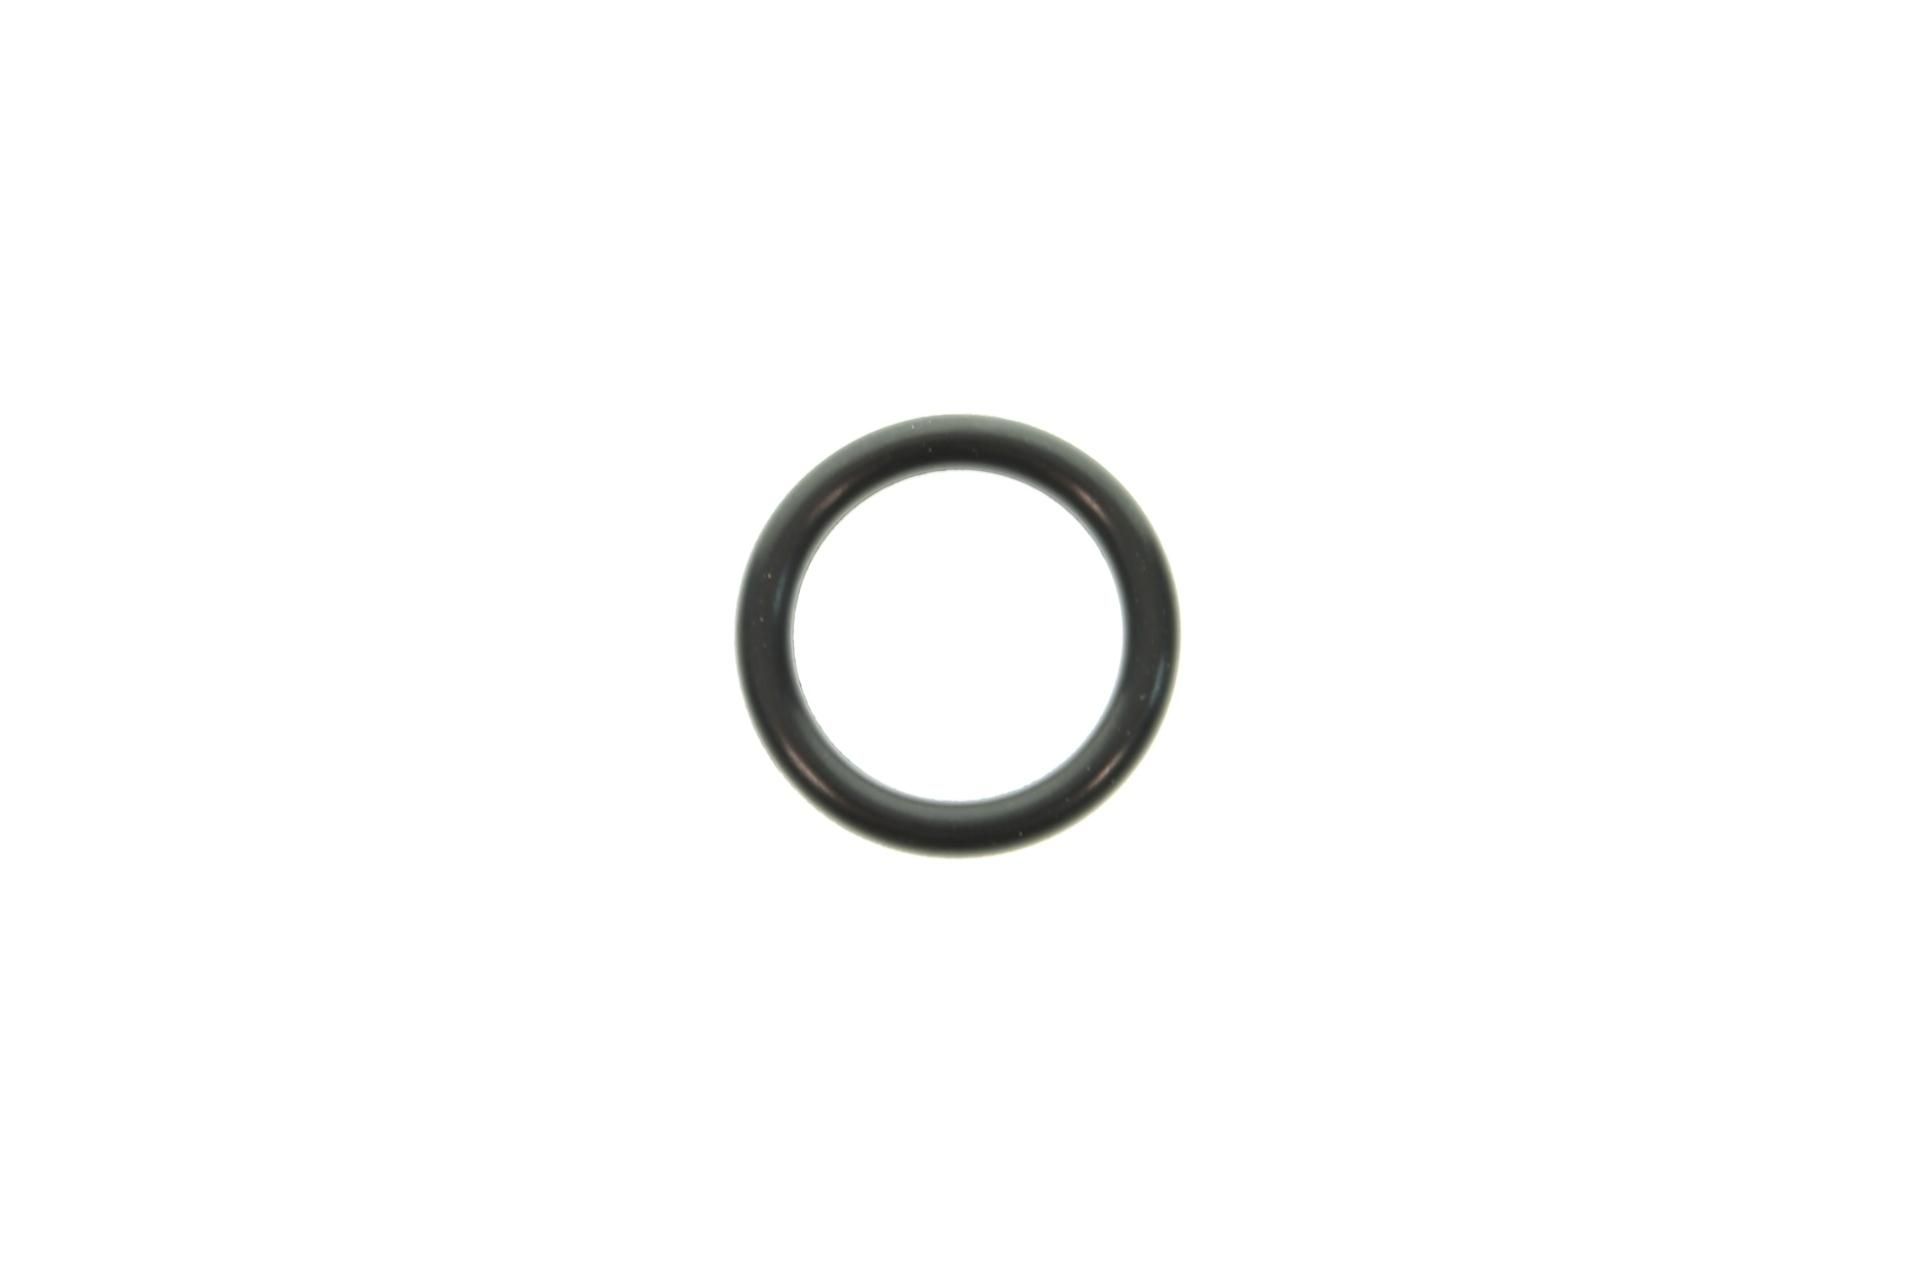 92055-0848 in.Oin. RING,8M/M